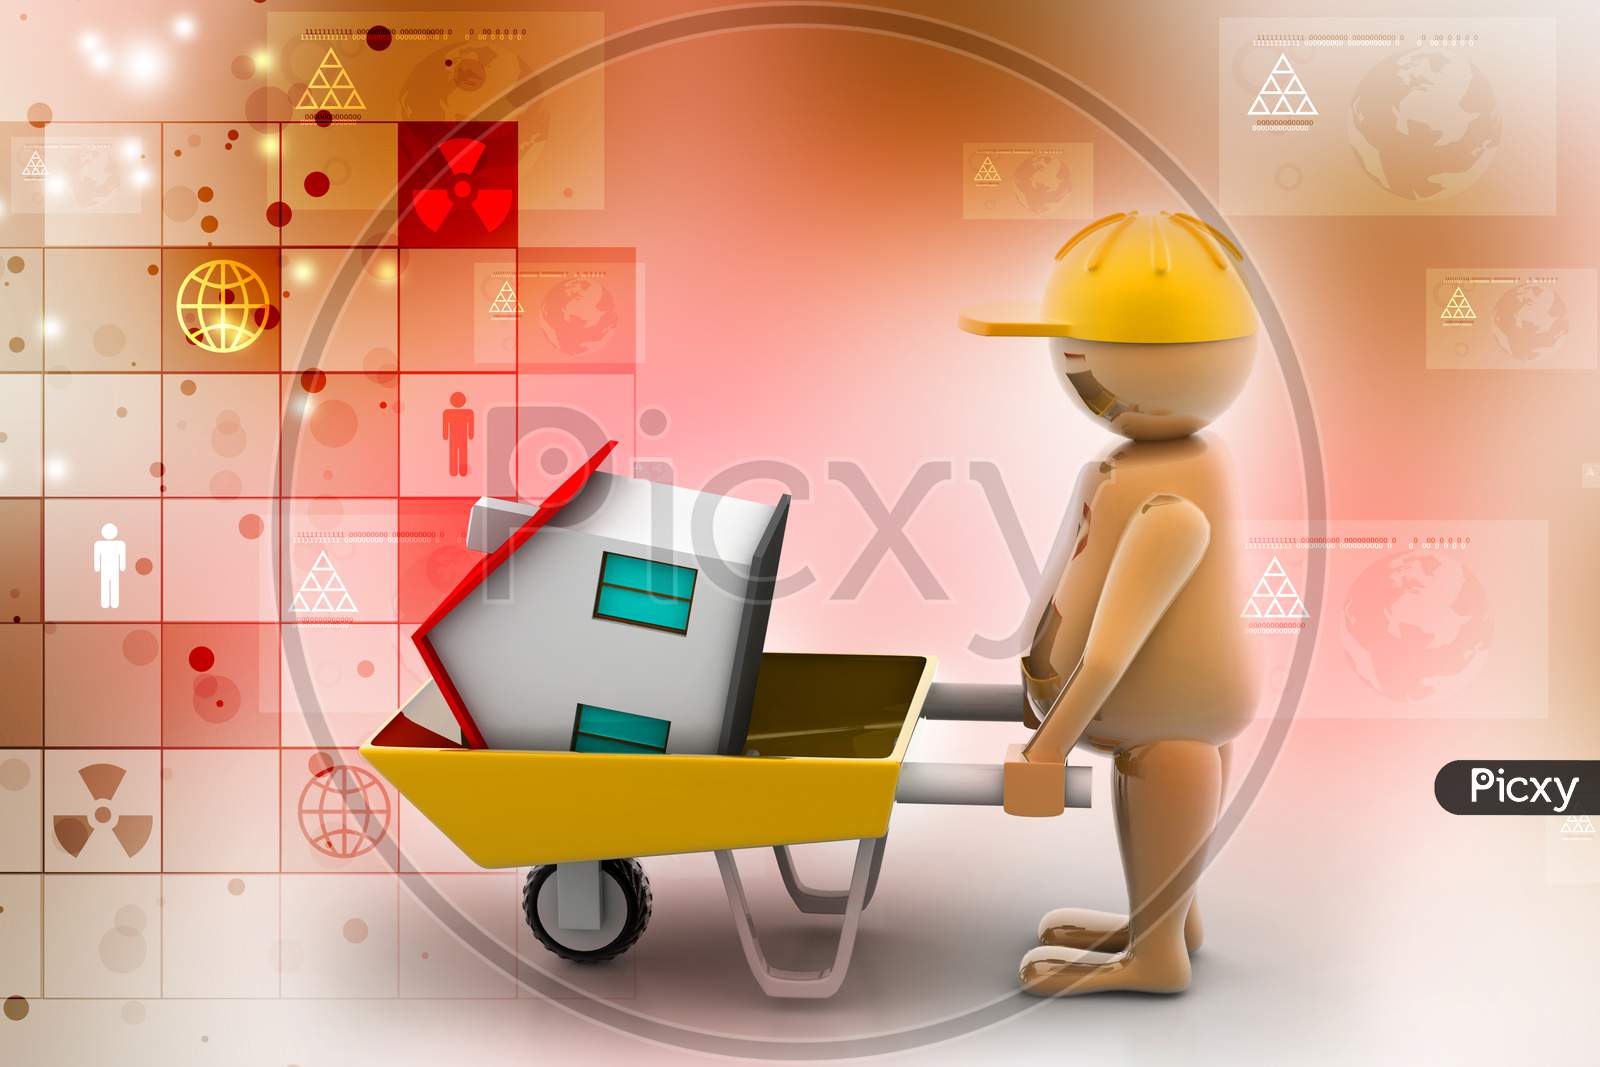 3D Multi Use Construction Worker With A Wheelbarrow In Color Background